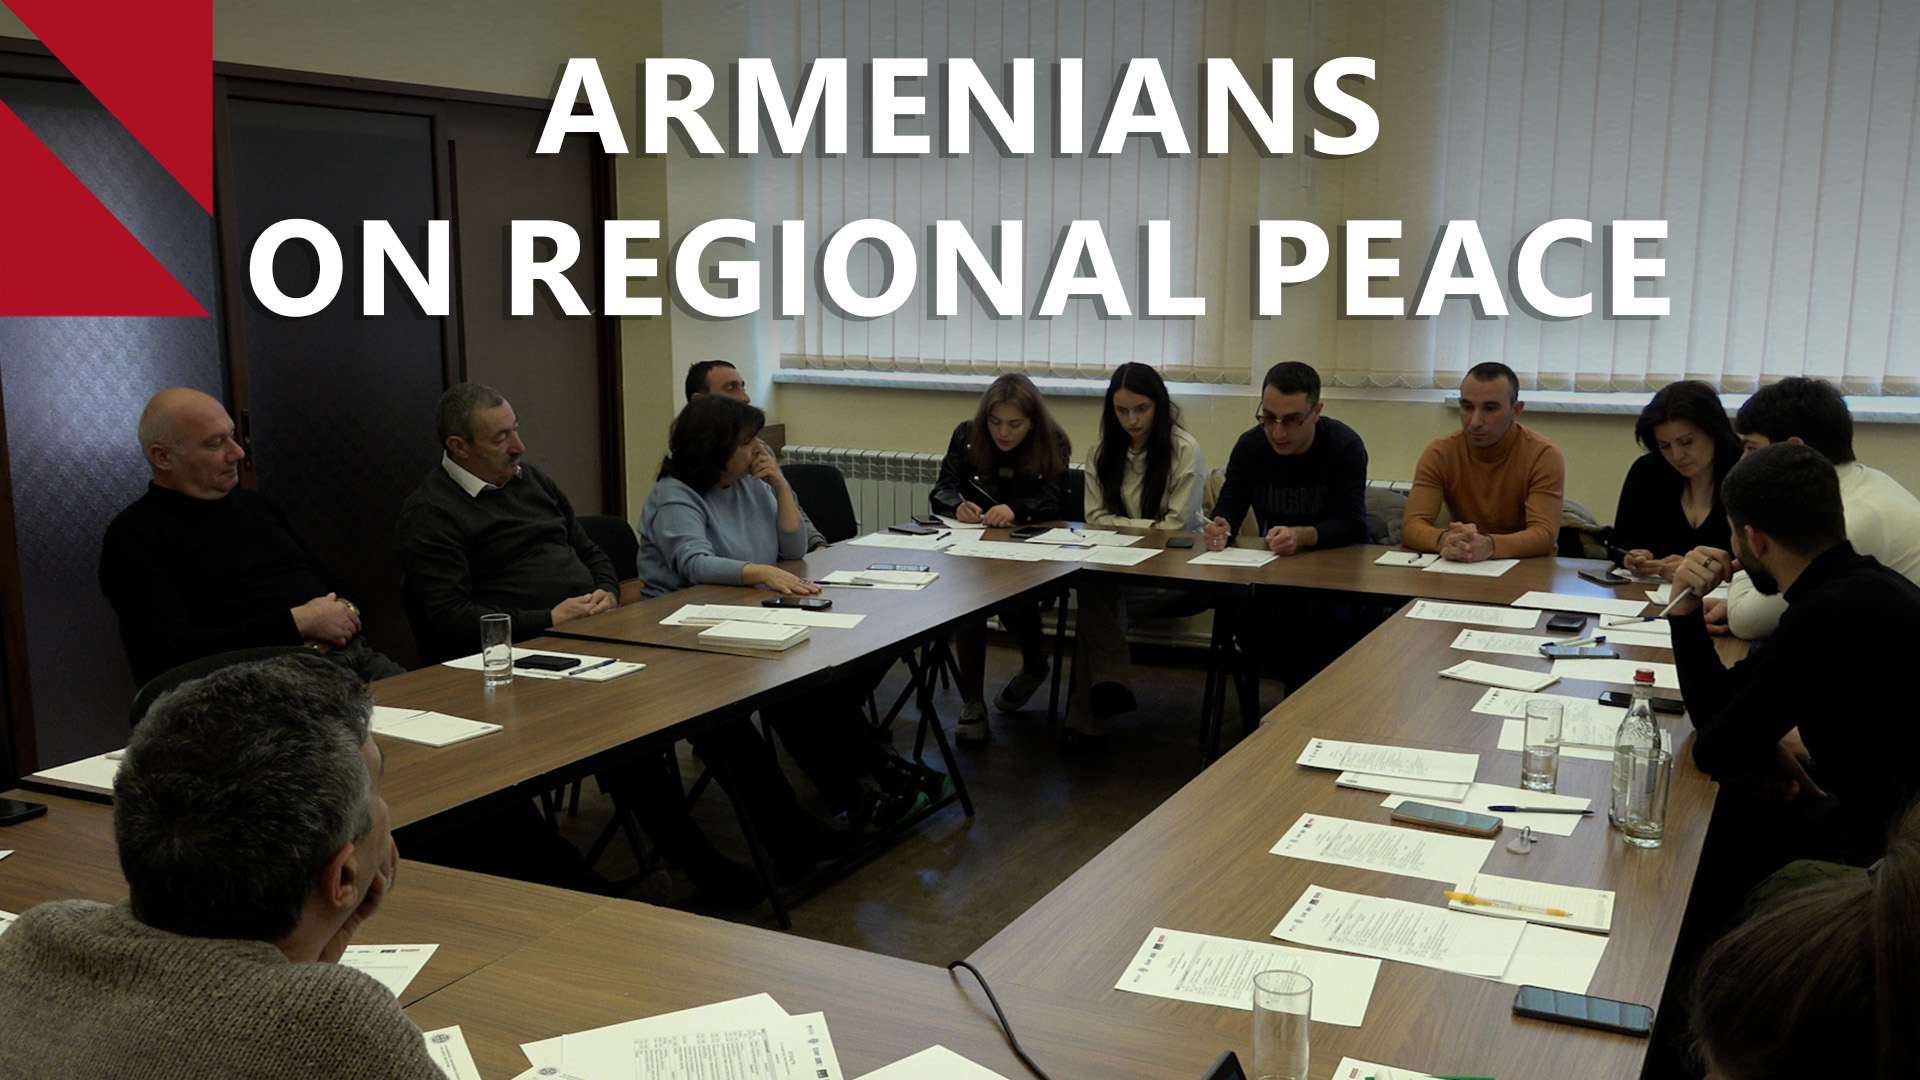 Perceptions on the prospects for peace in the regions